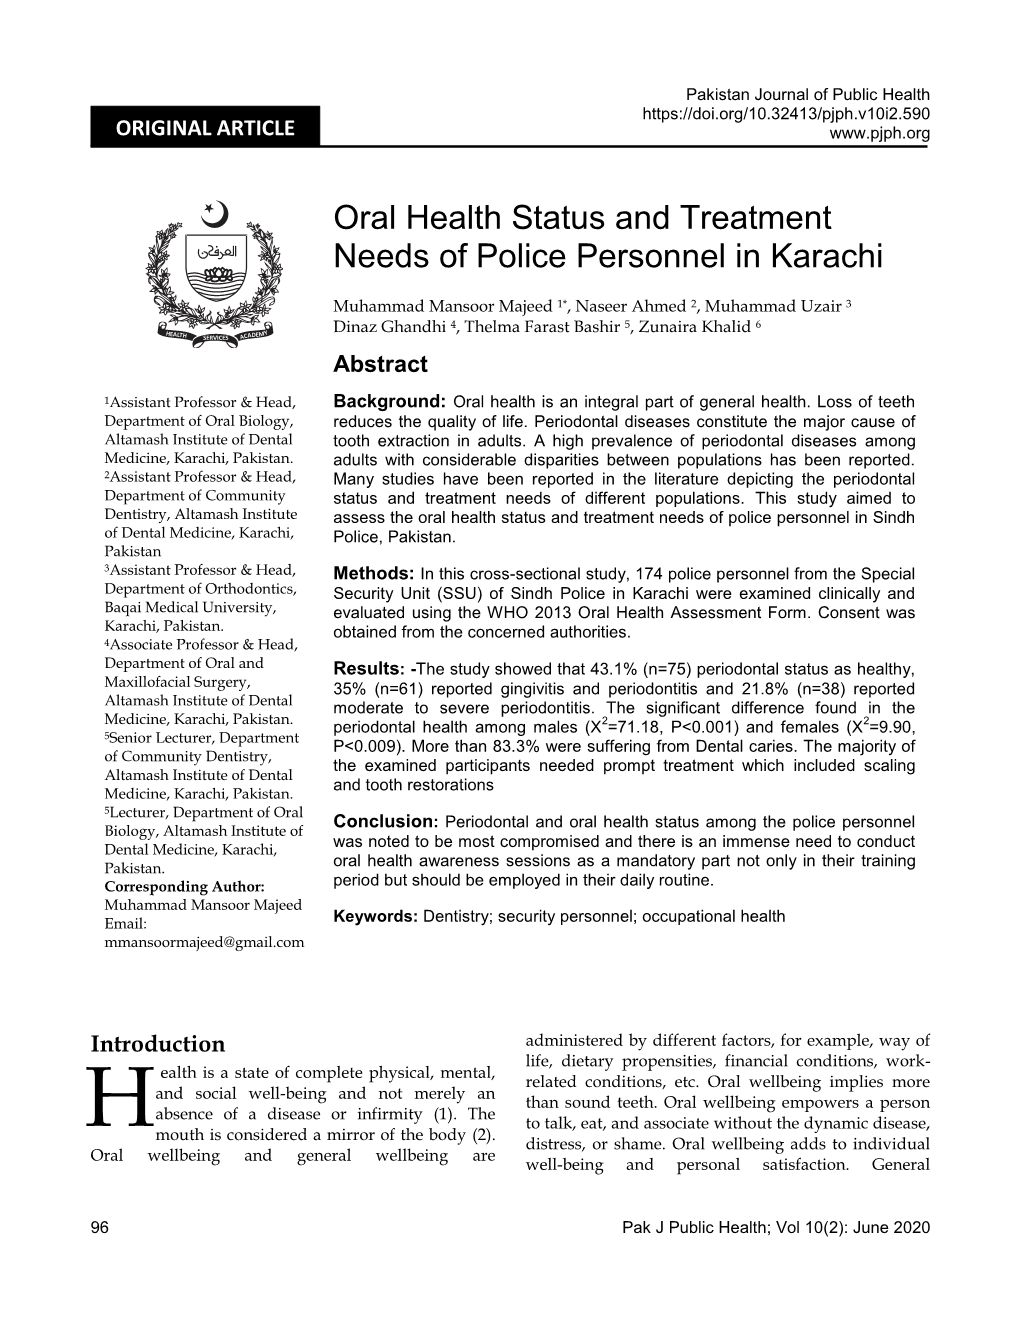 Oral Health Status and Treatment Needs of Police Personnel in Karachi